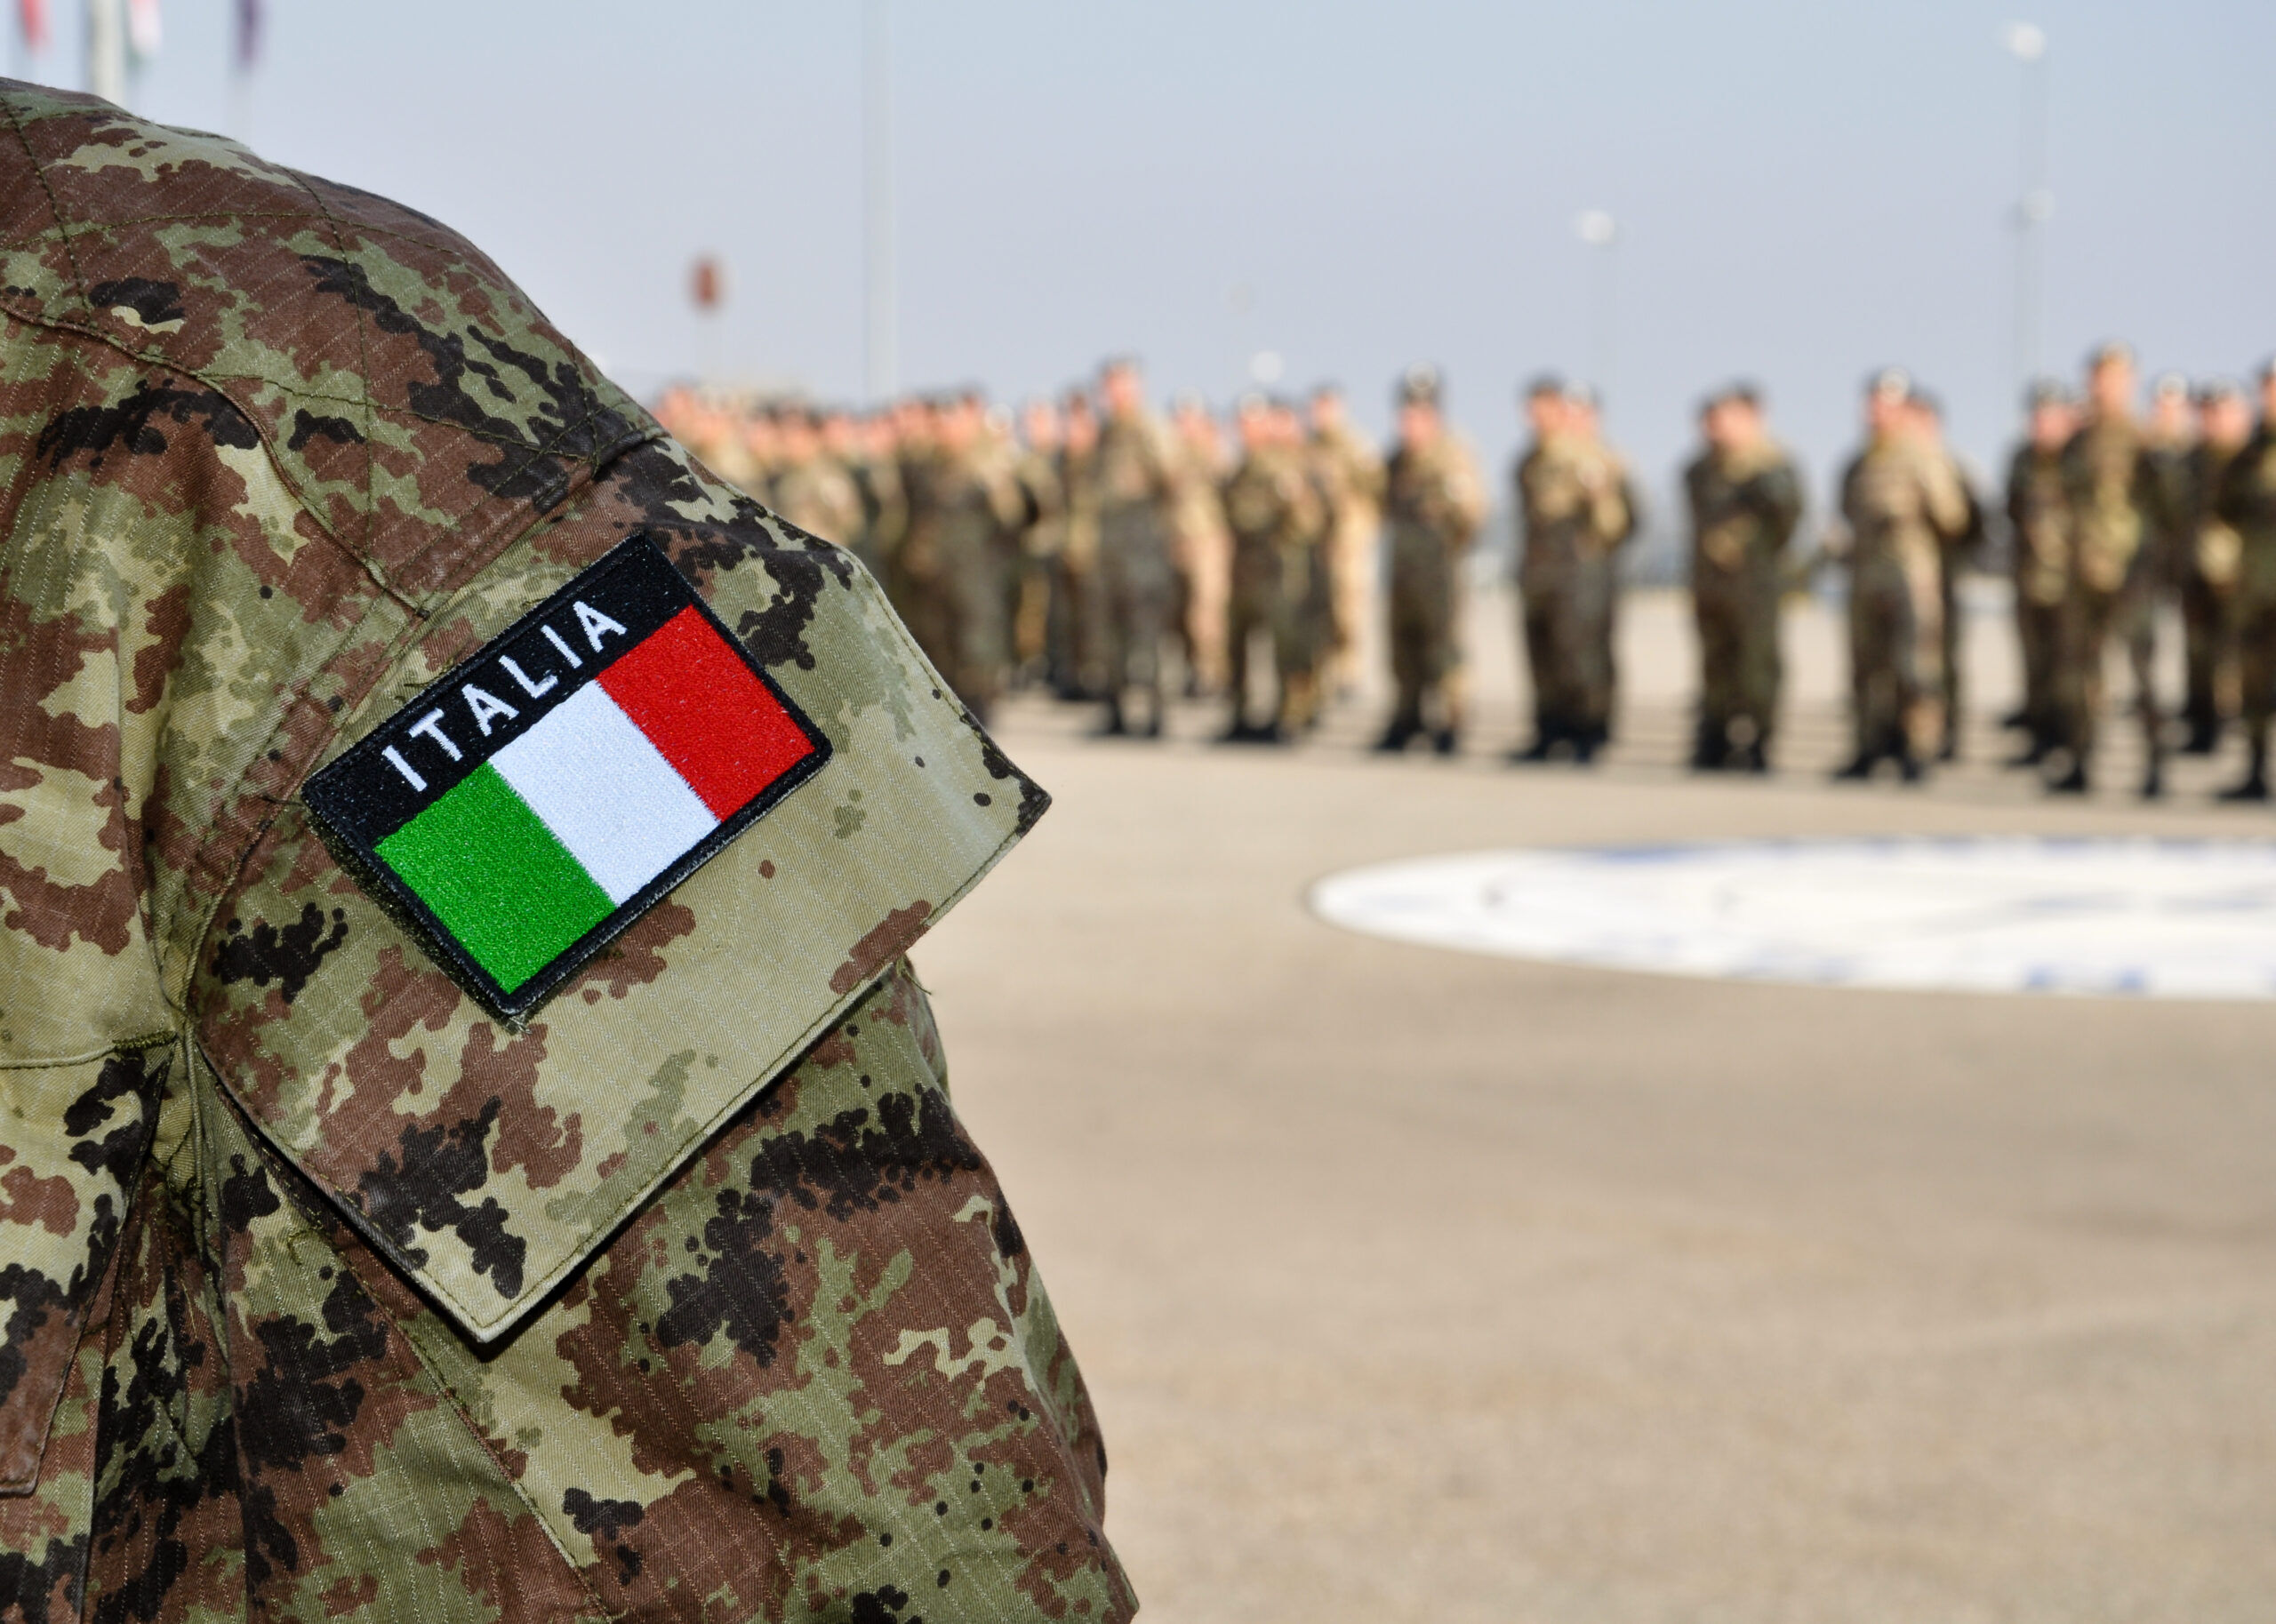 close up of an italian uniform with digital camouflage pattern and the national flag at a parade with KFOR troops in Kosovo